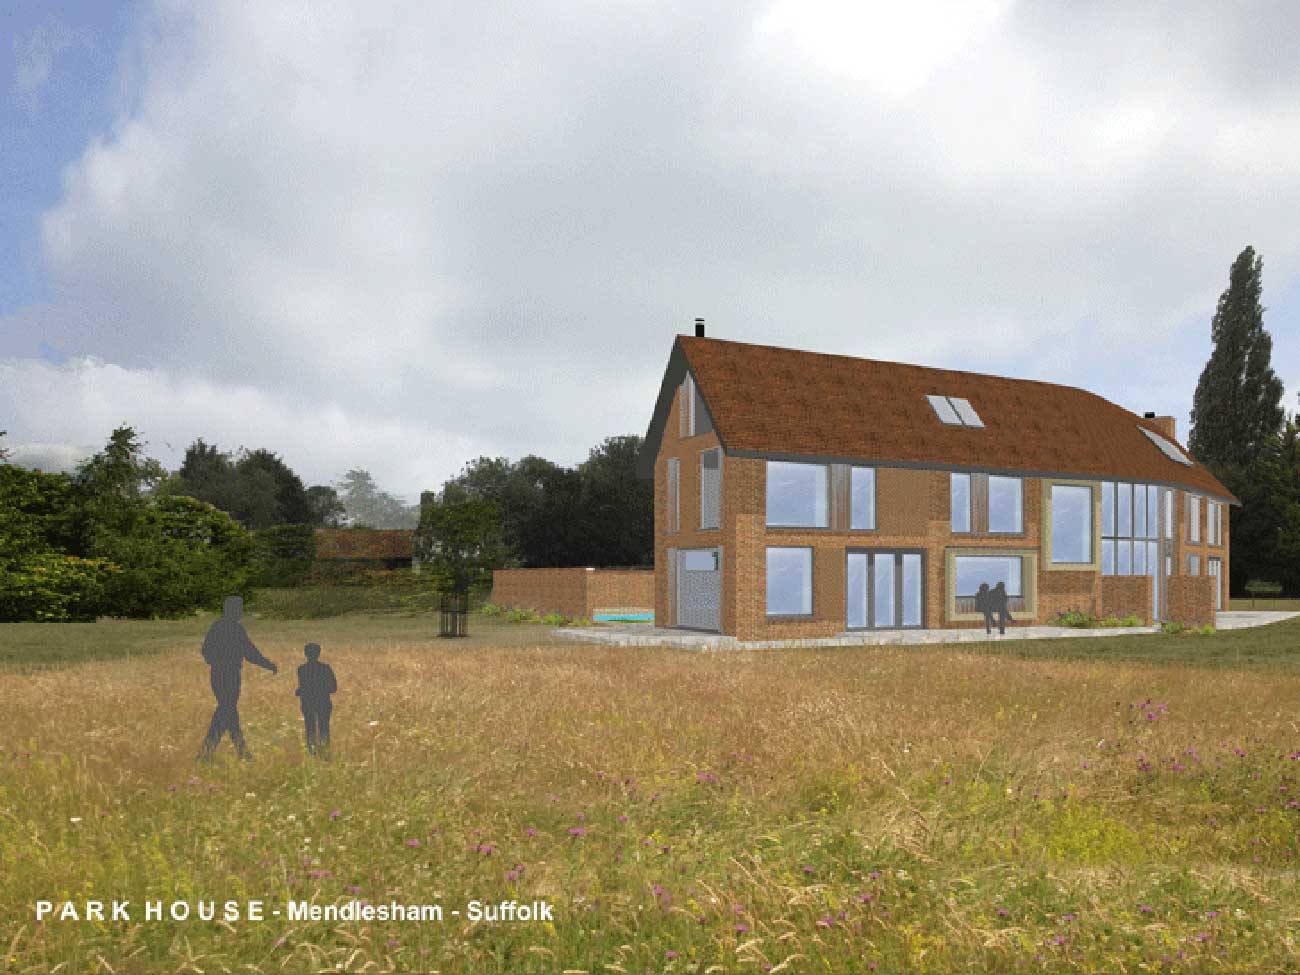 New House In Mendlesham Suffolk by Beech Architects